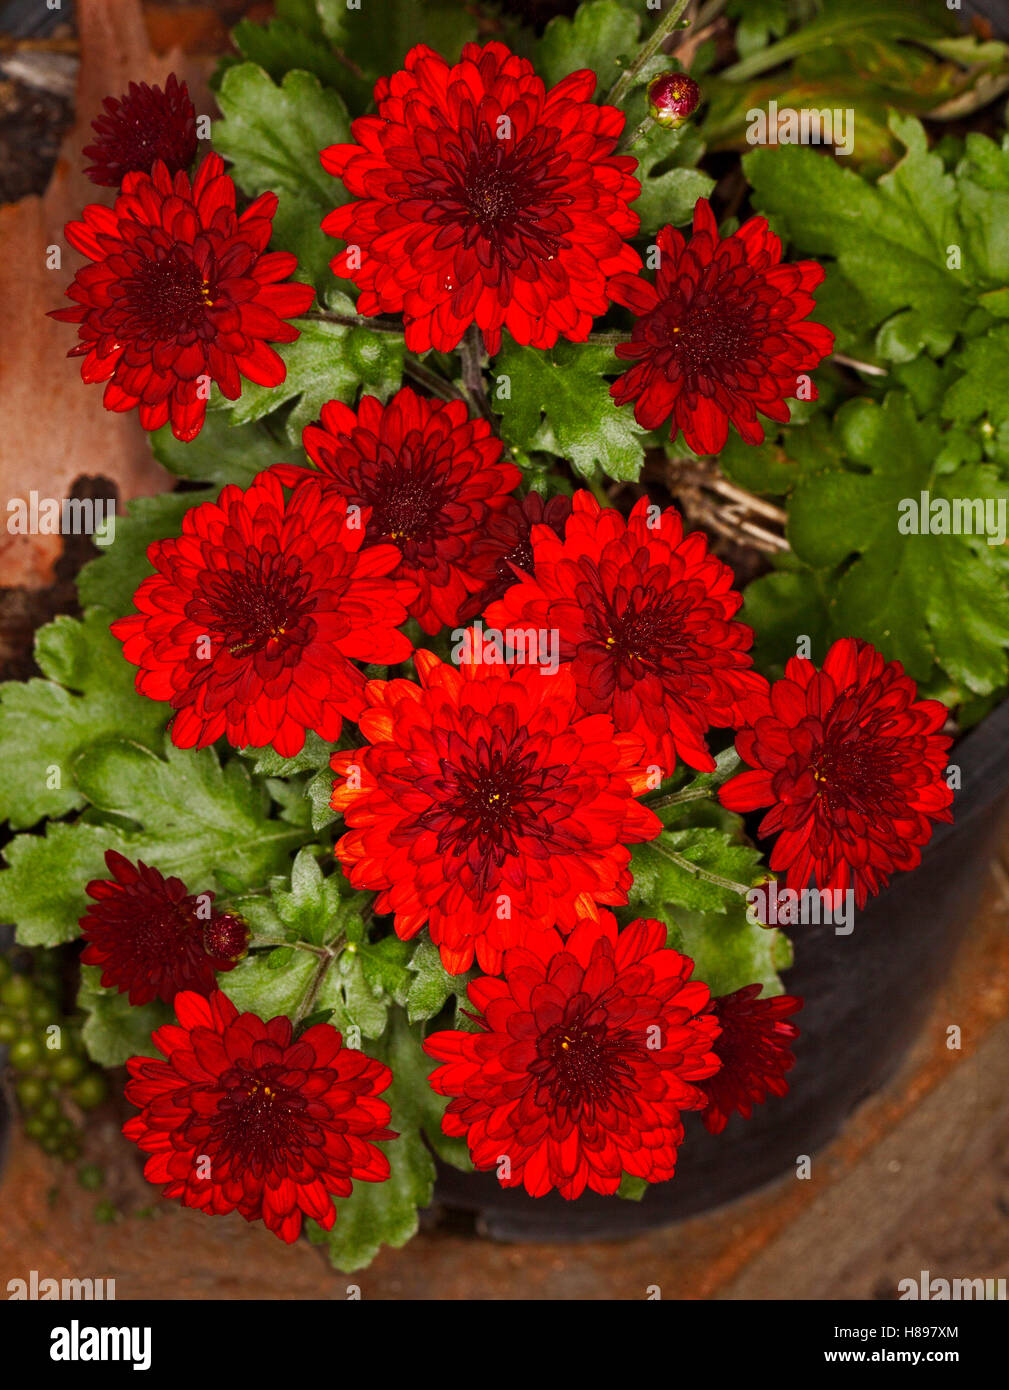 Large cluster of spectacular vivid deep blood red chrysanthemum flowers & emerald green leaves in garden container Stock Photo